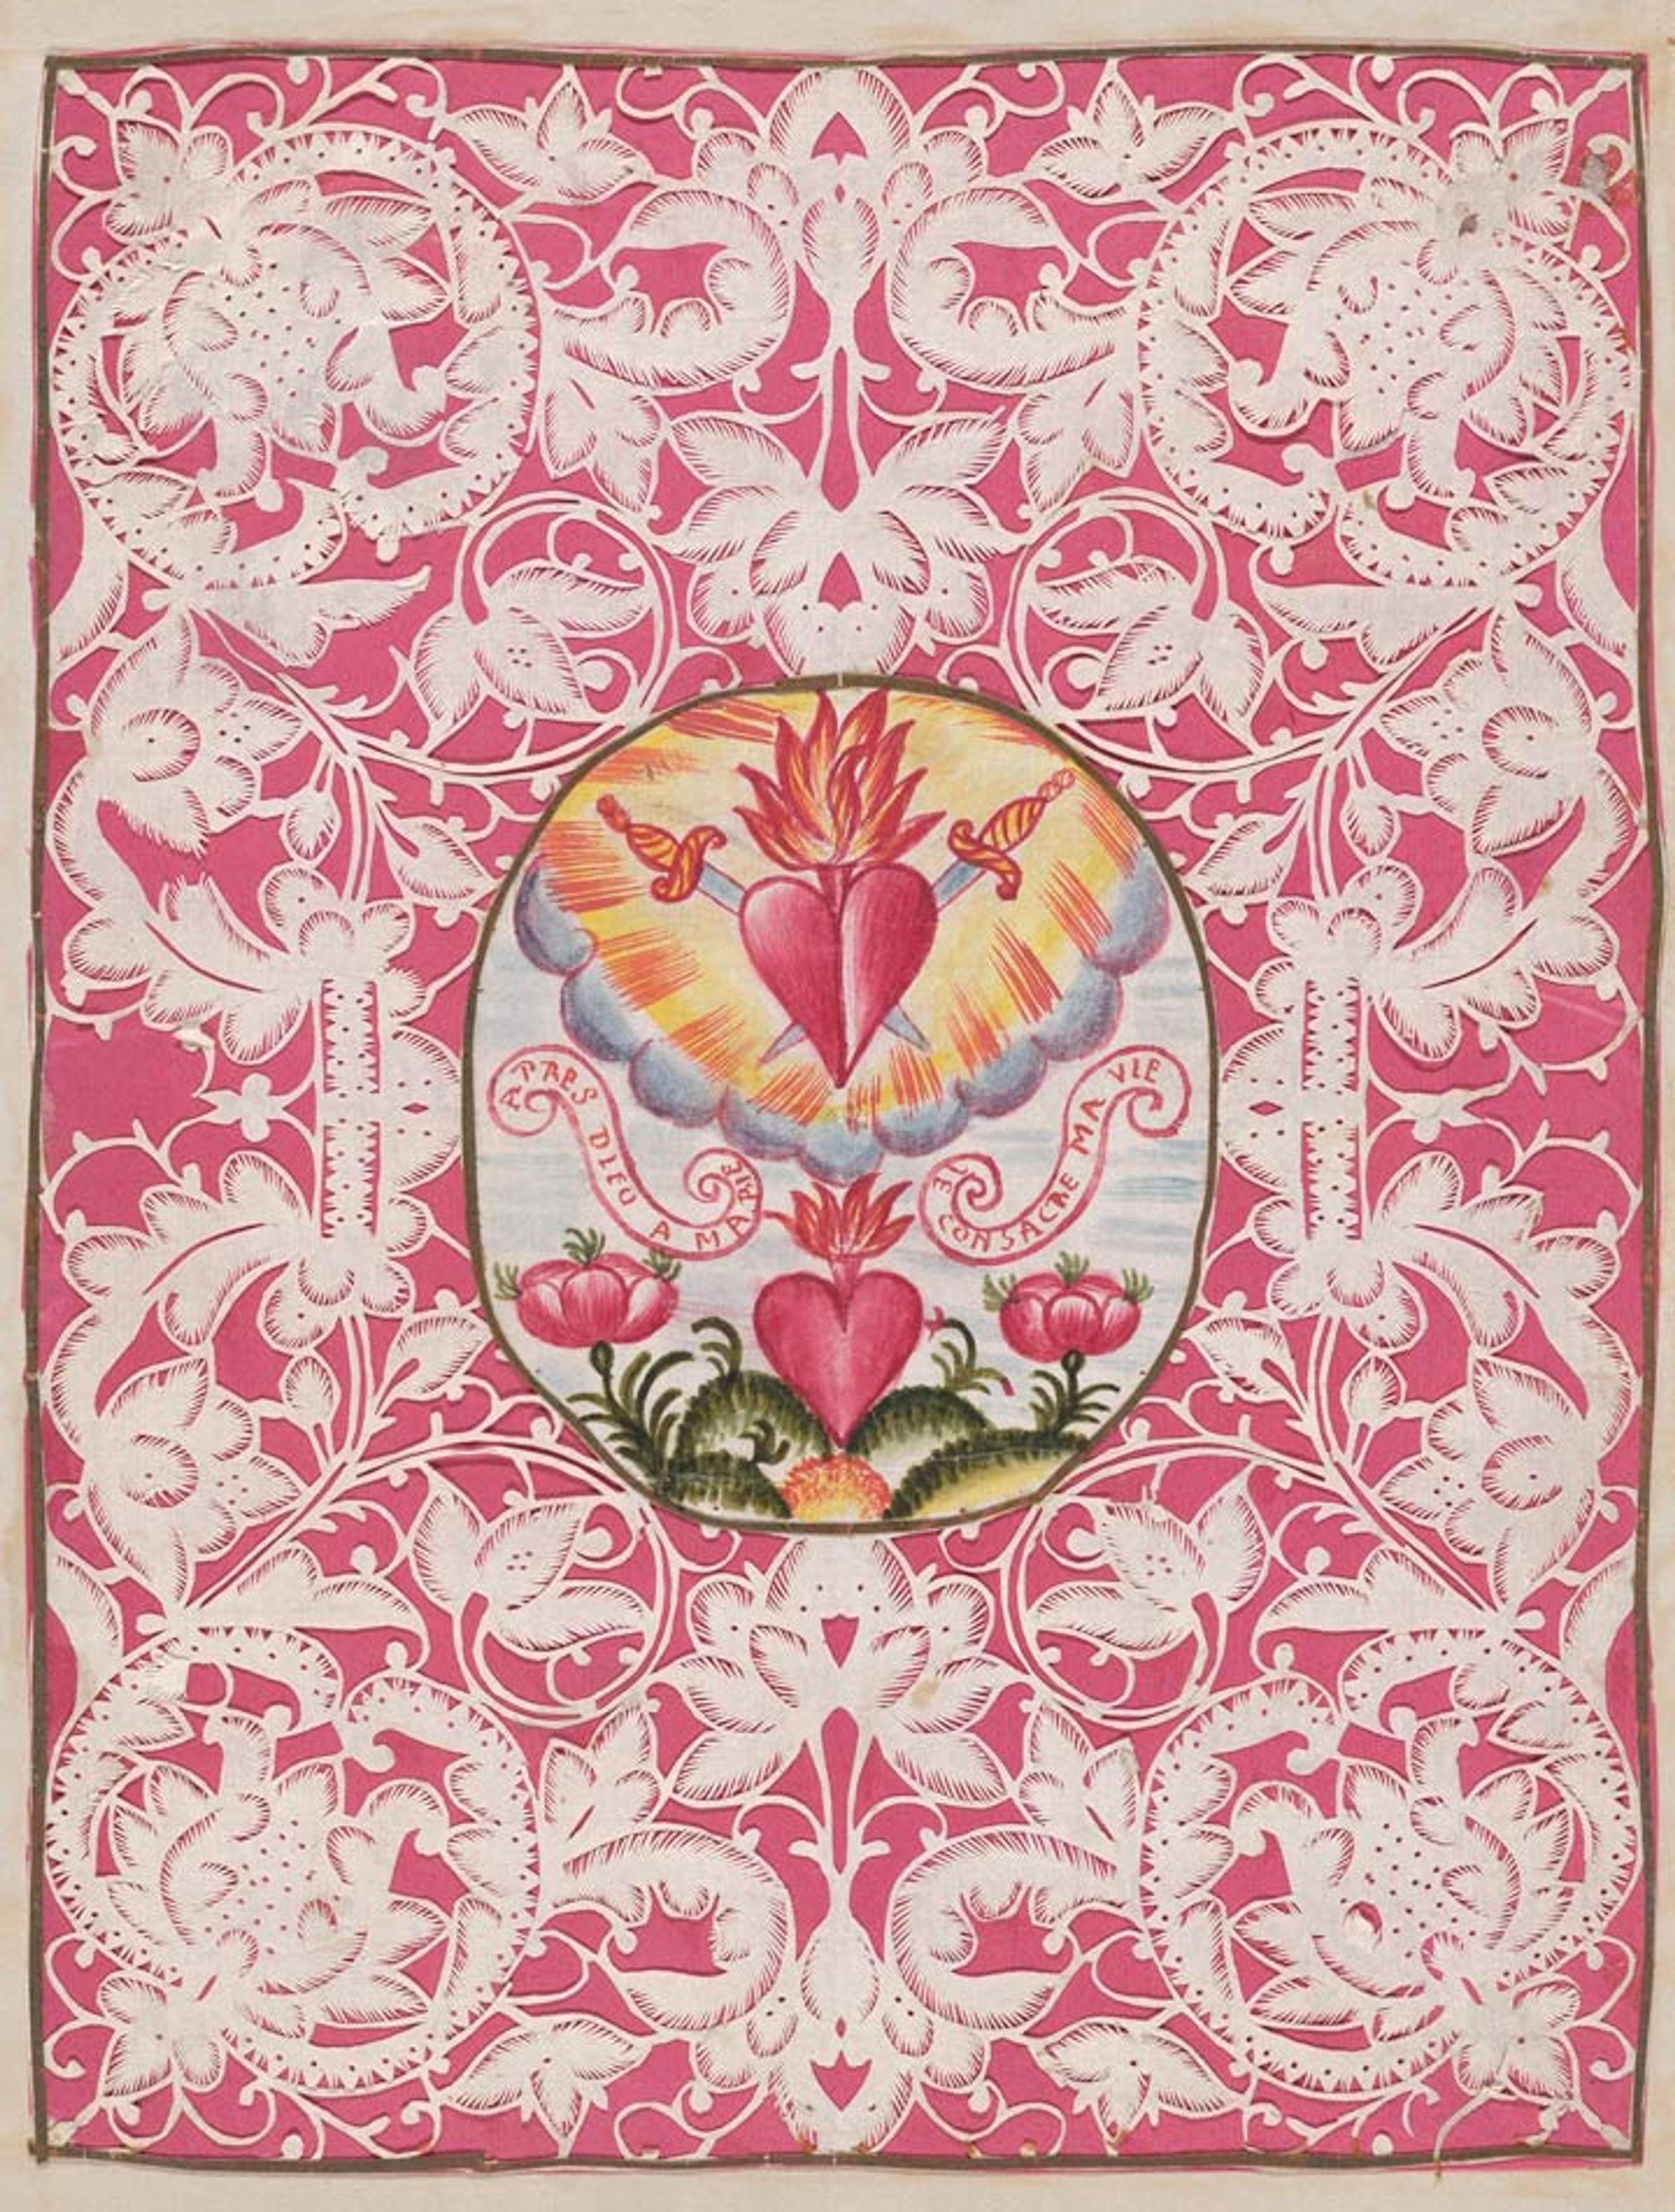 An 18th-century valentine with a central image of hearts aflame, surrounded by an intricate red-and-white design